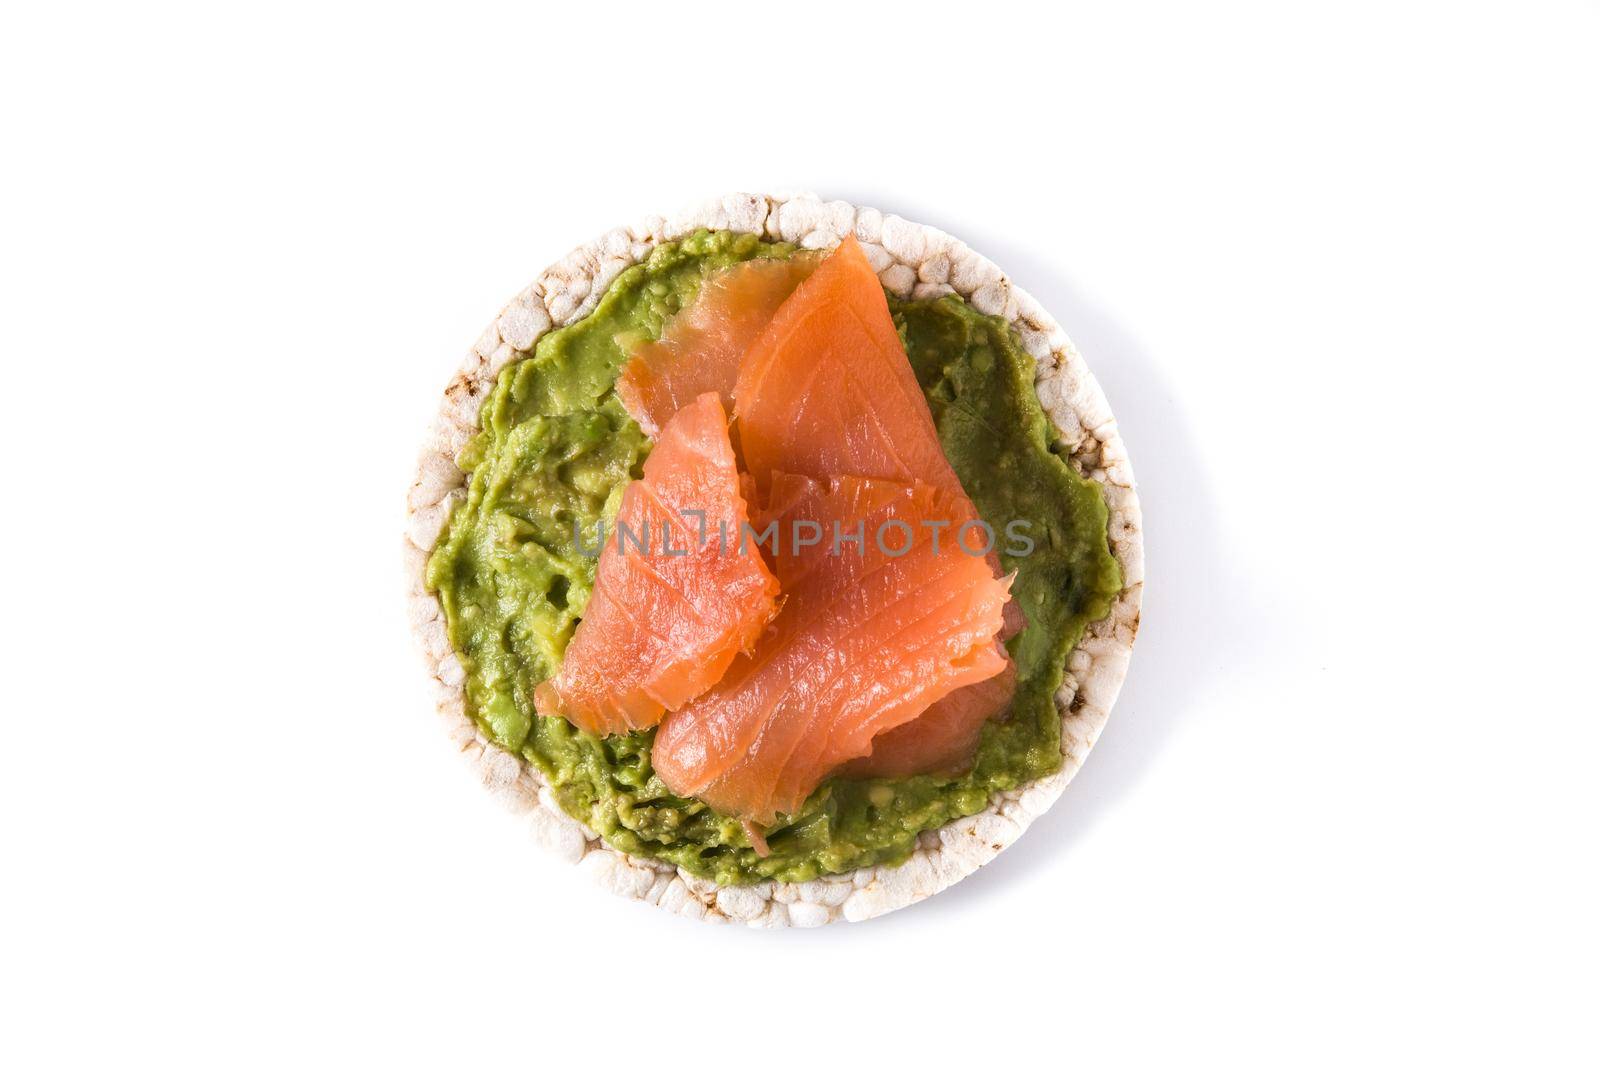 Puffed rice cake with guacamole and salmon by chandlervid85